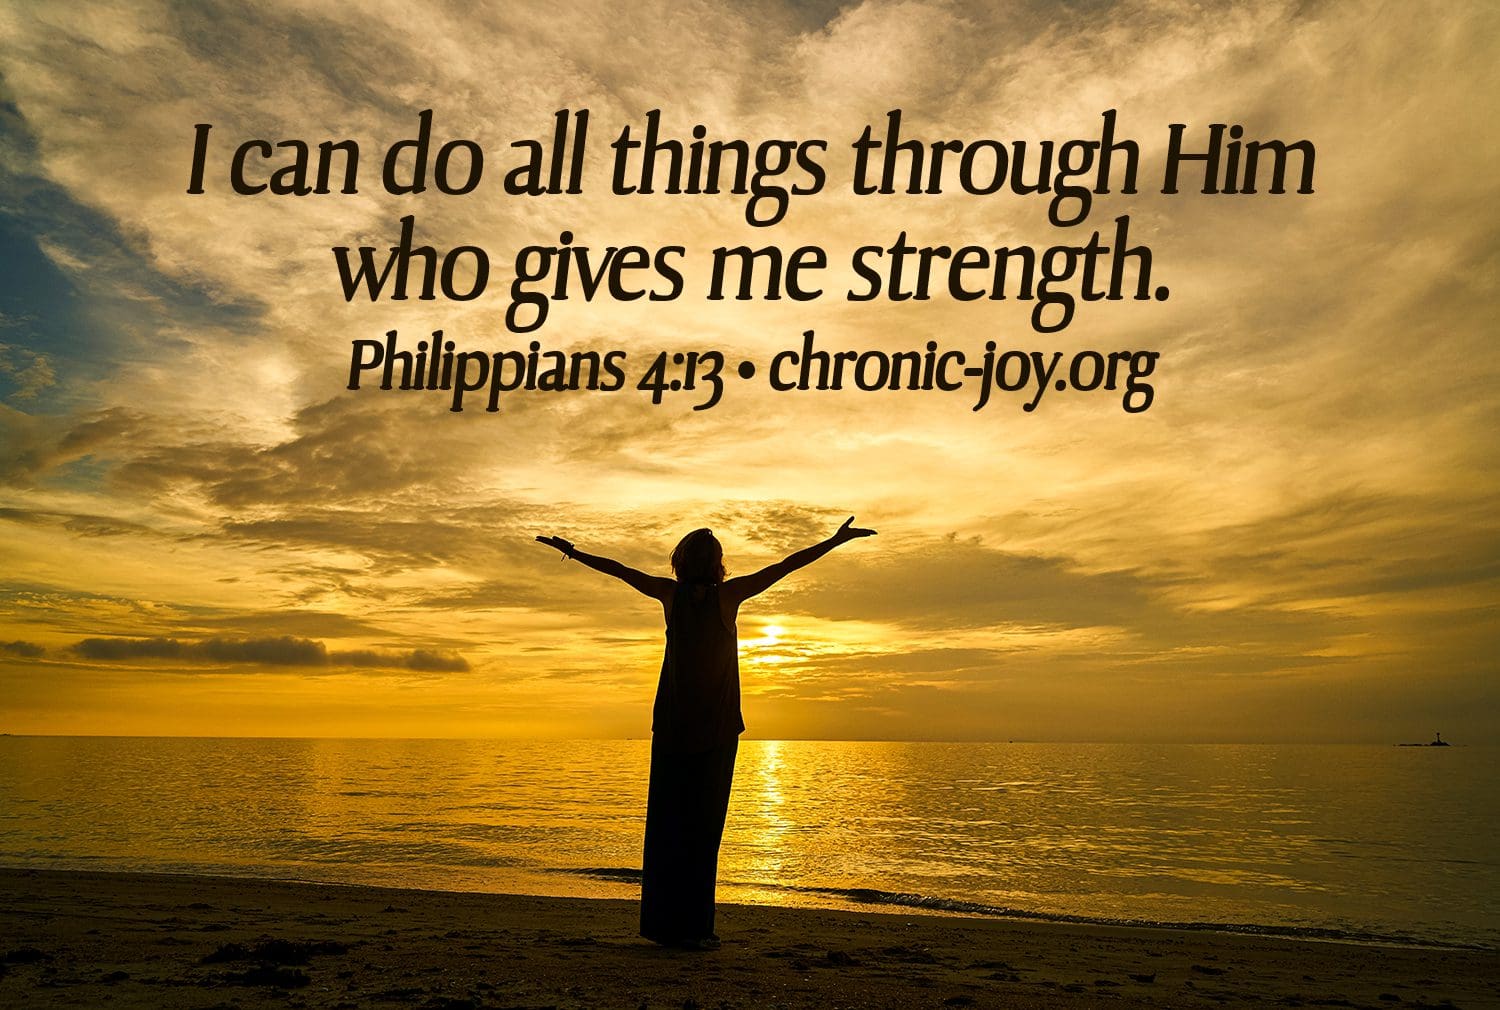 "​I can do all things through Him who gives me strength." Philippians 4:13